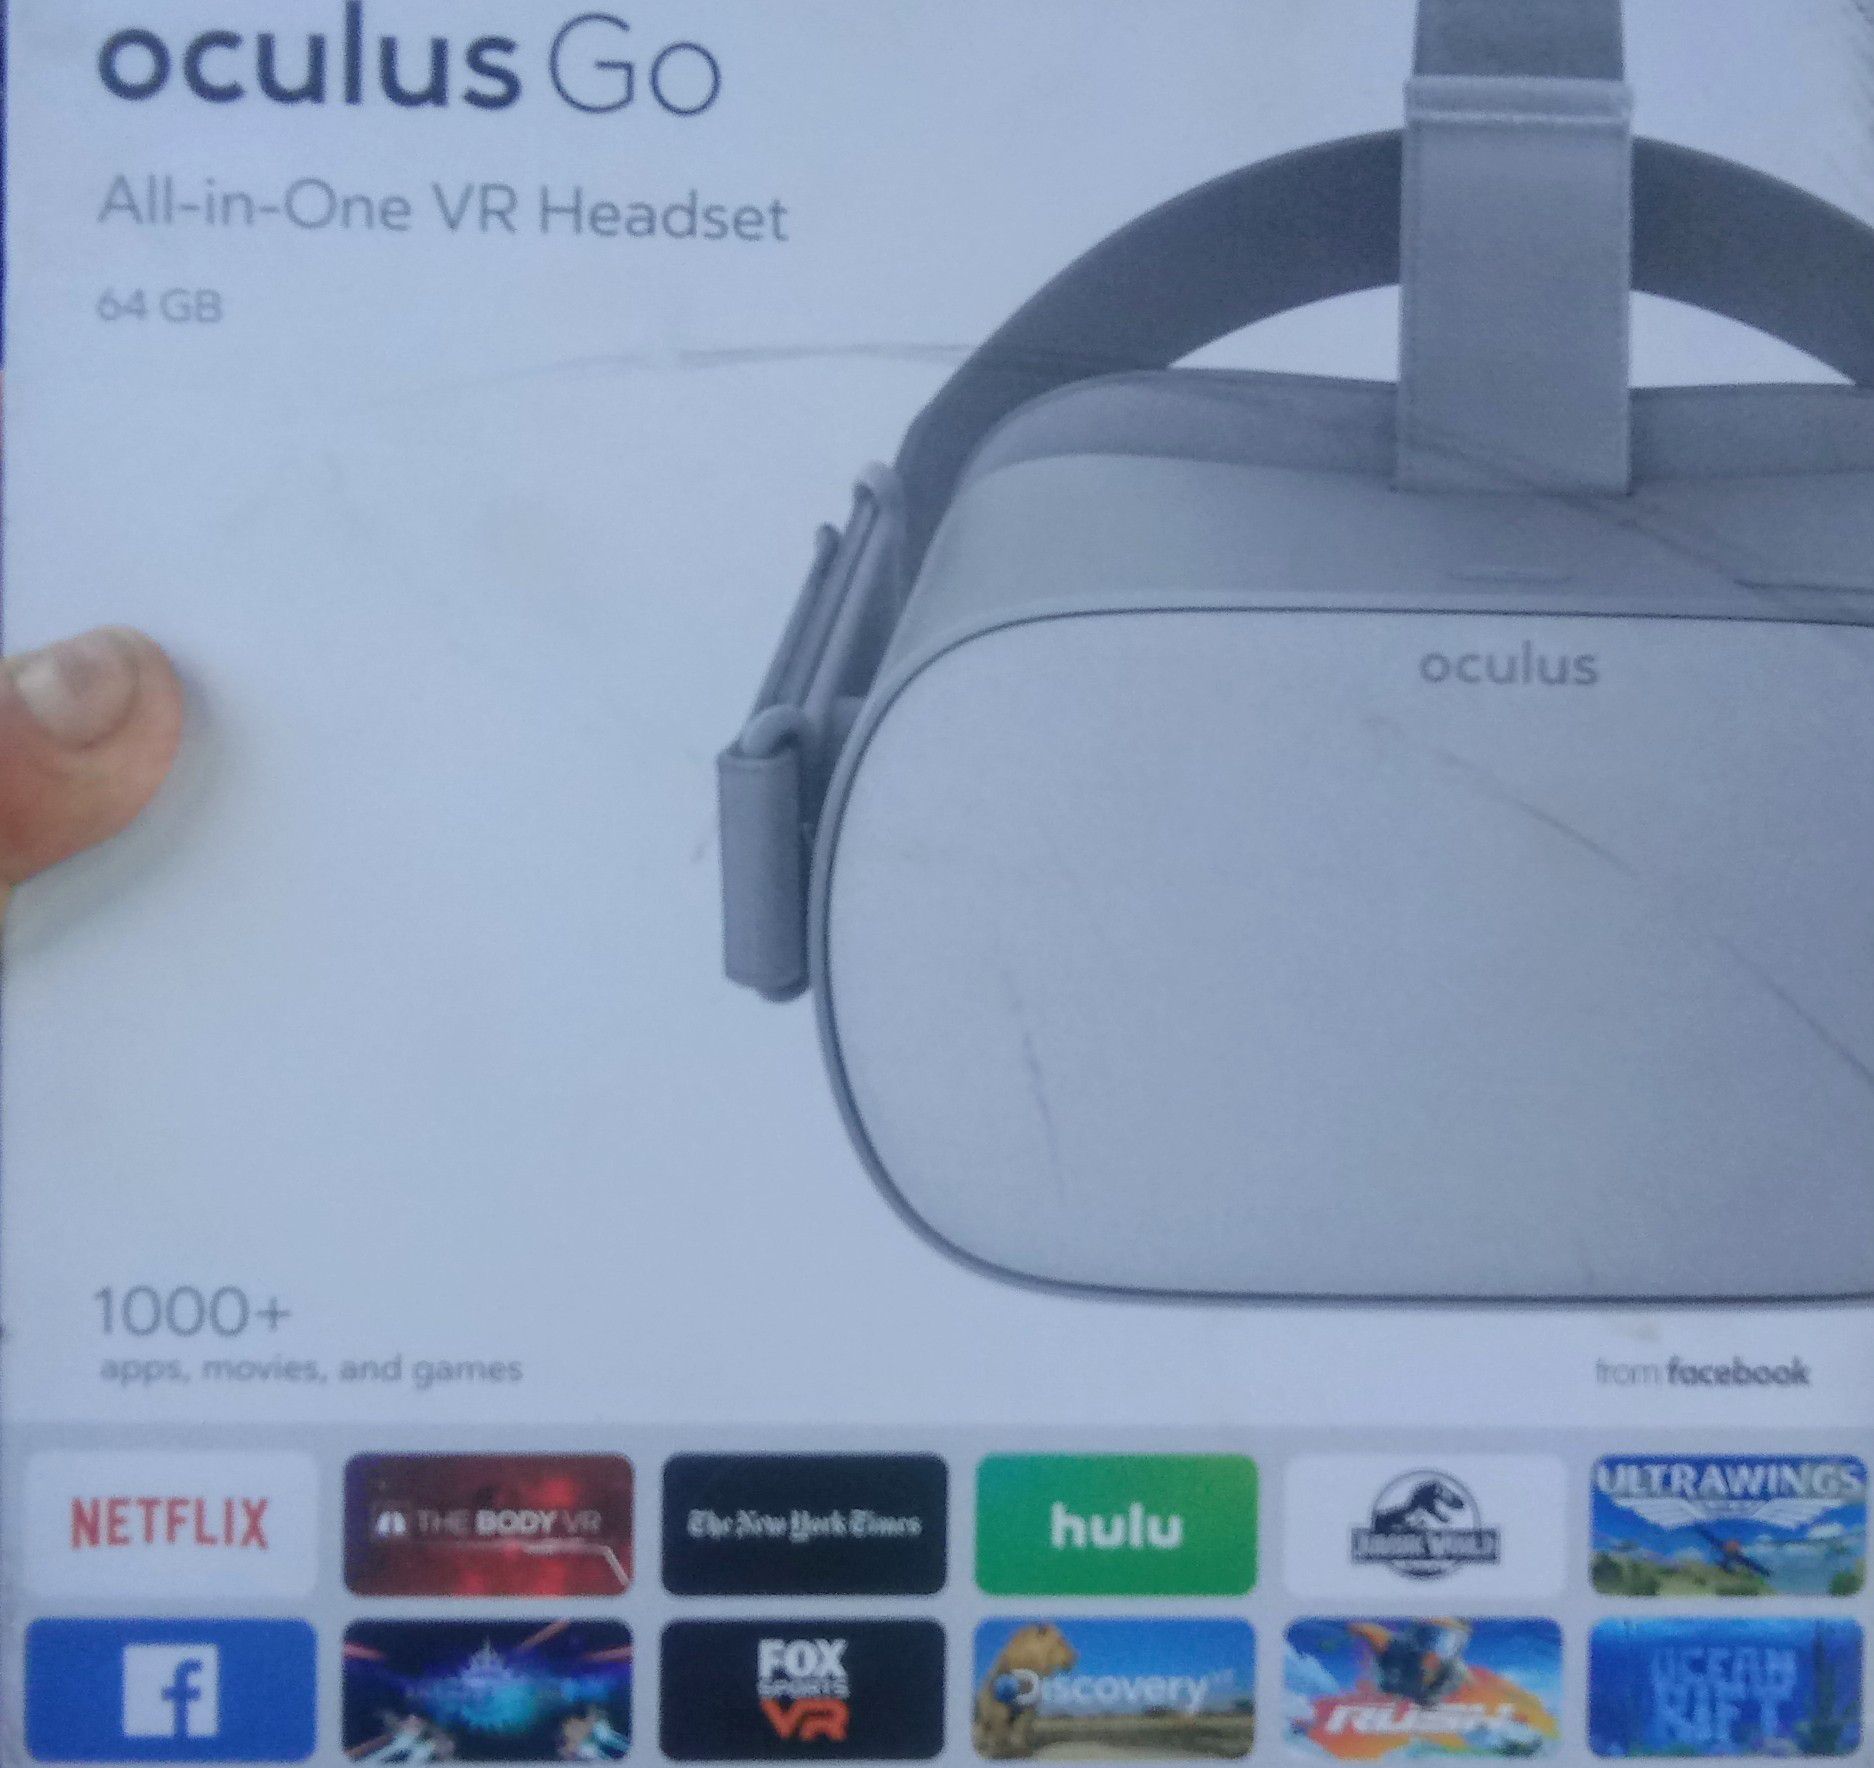 Oculus Go All-in-One VR